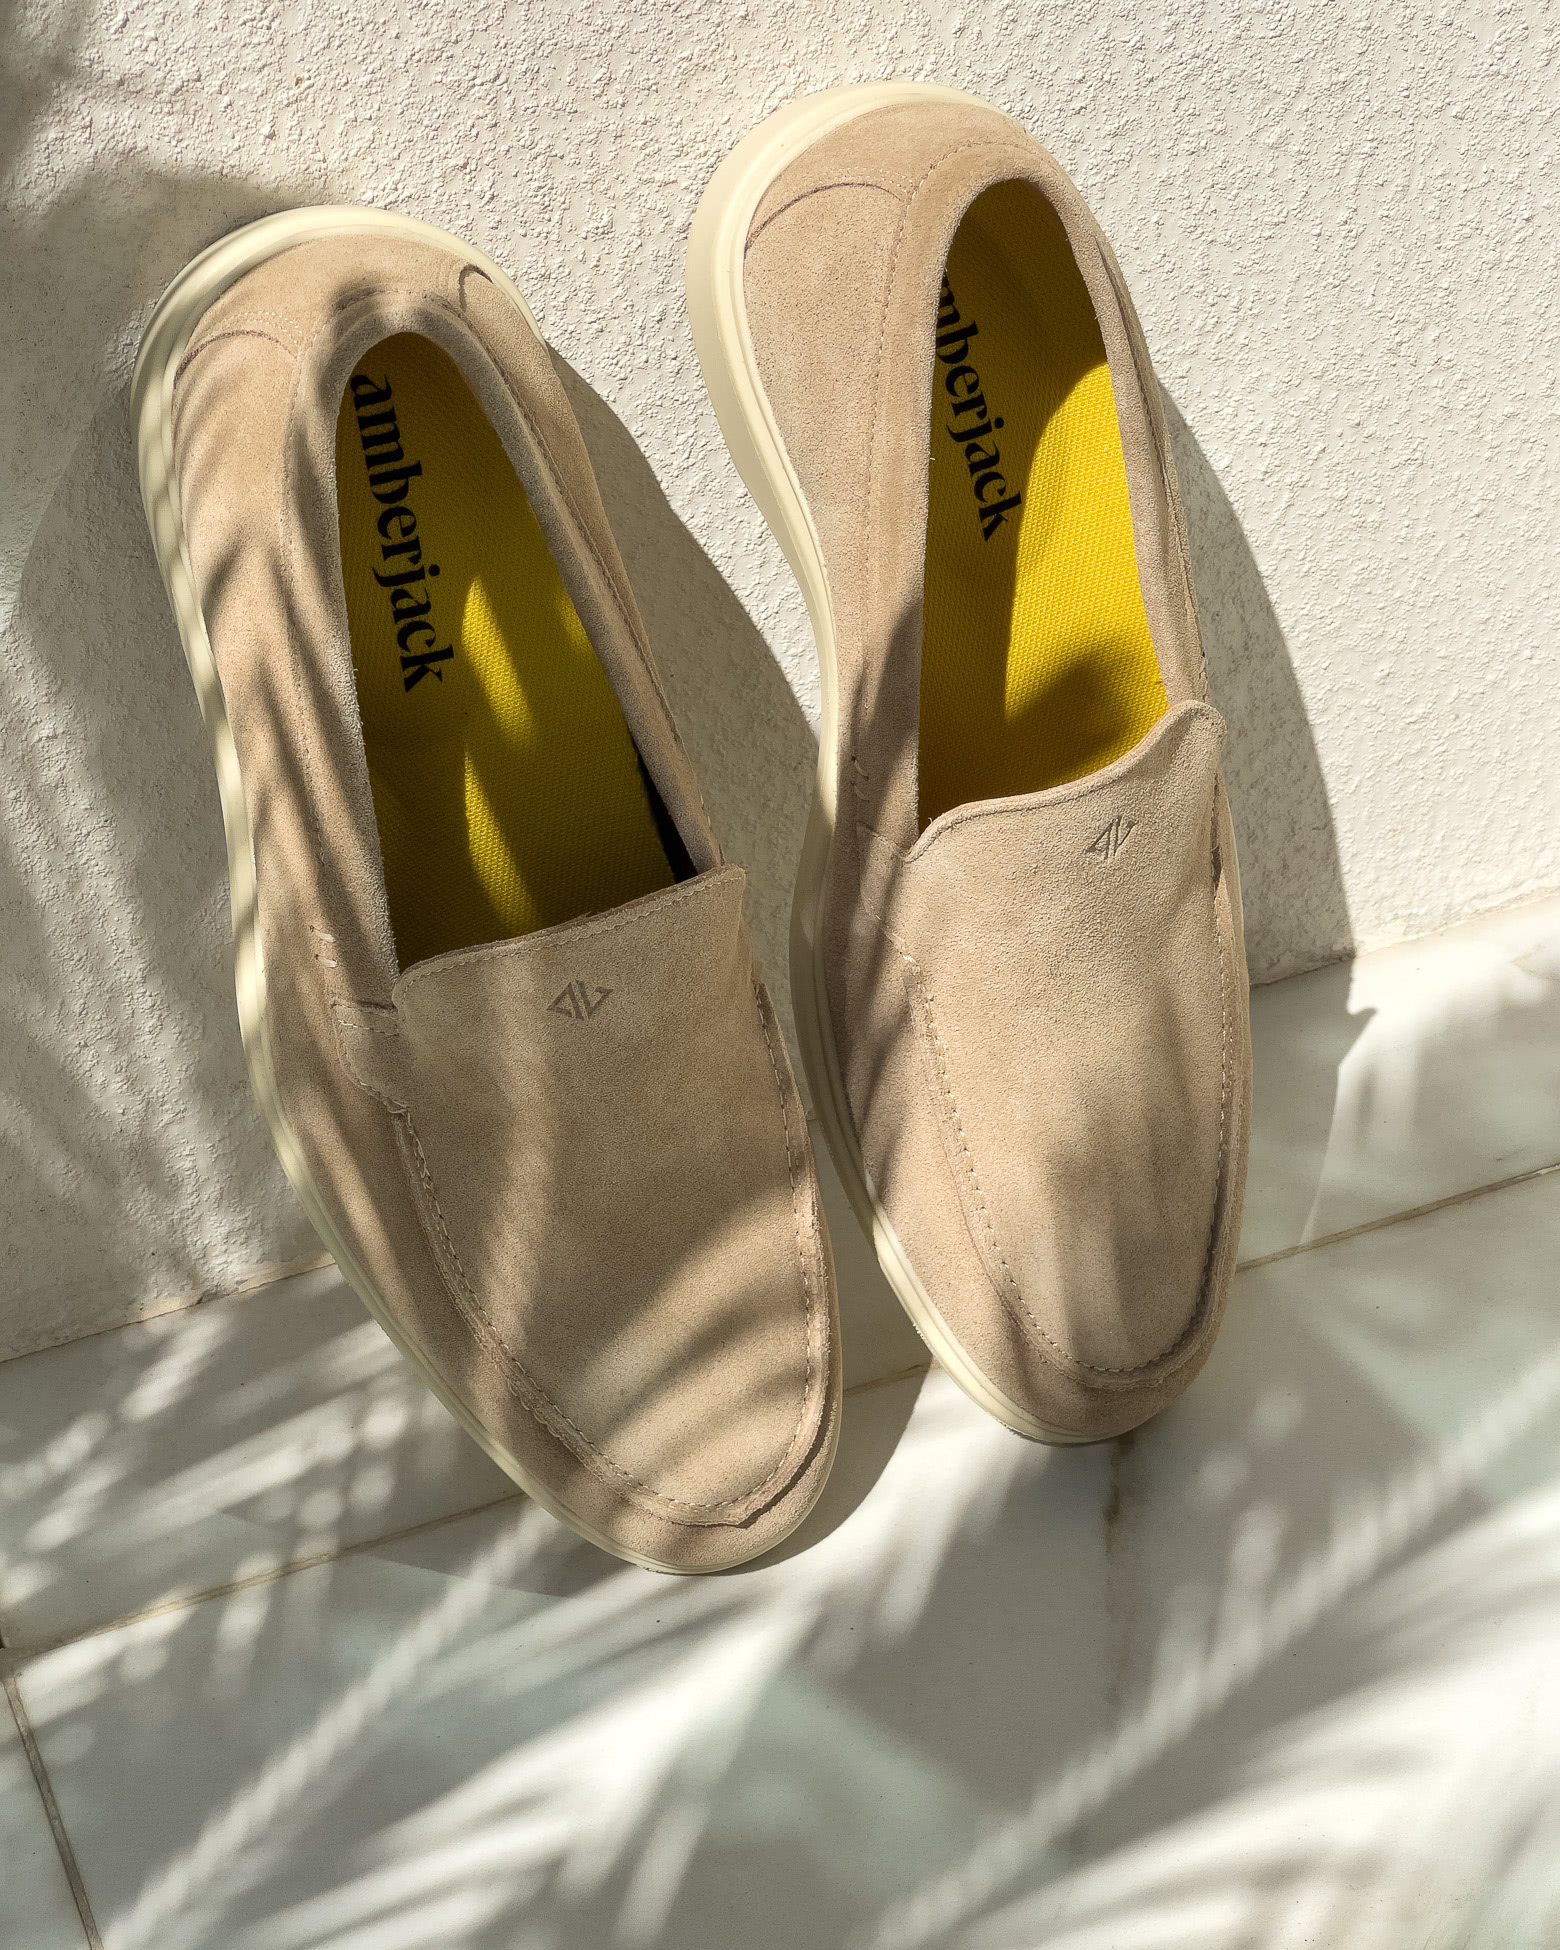 Amberjack The Loafer Review: Comfort In A Stylish Dress Shoe